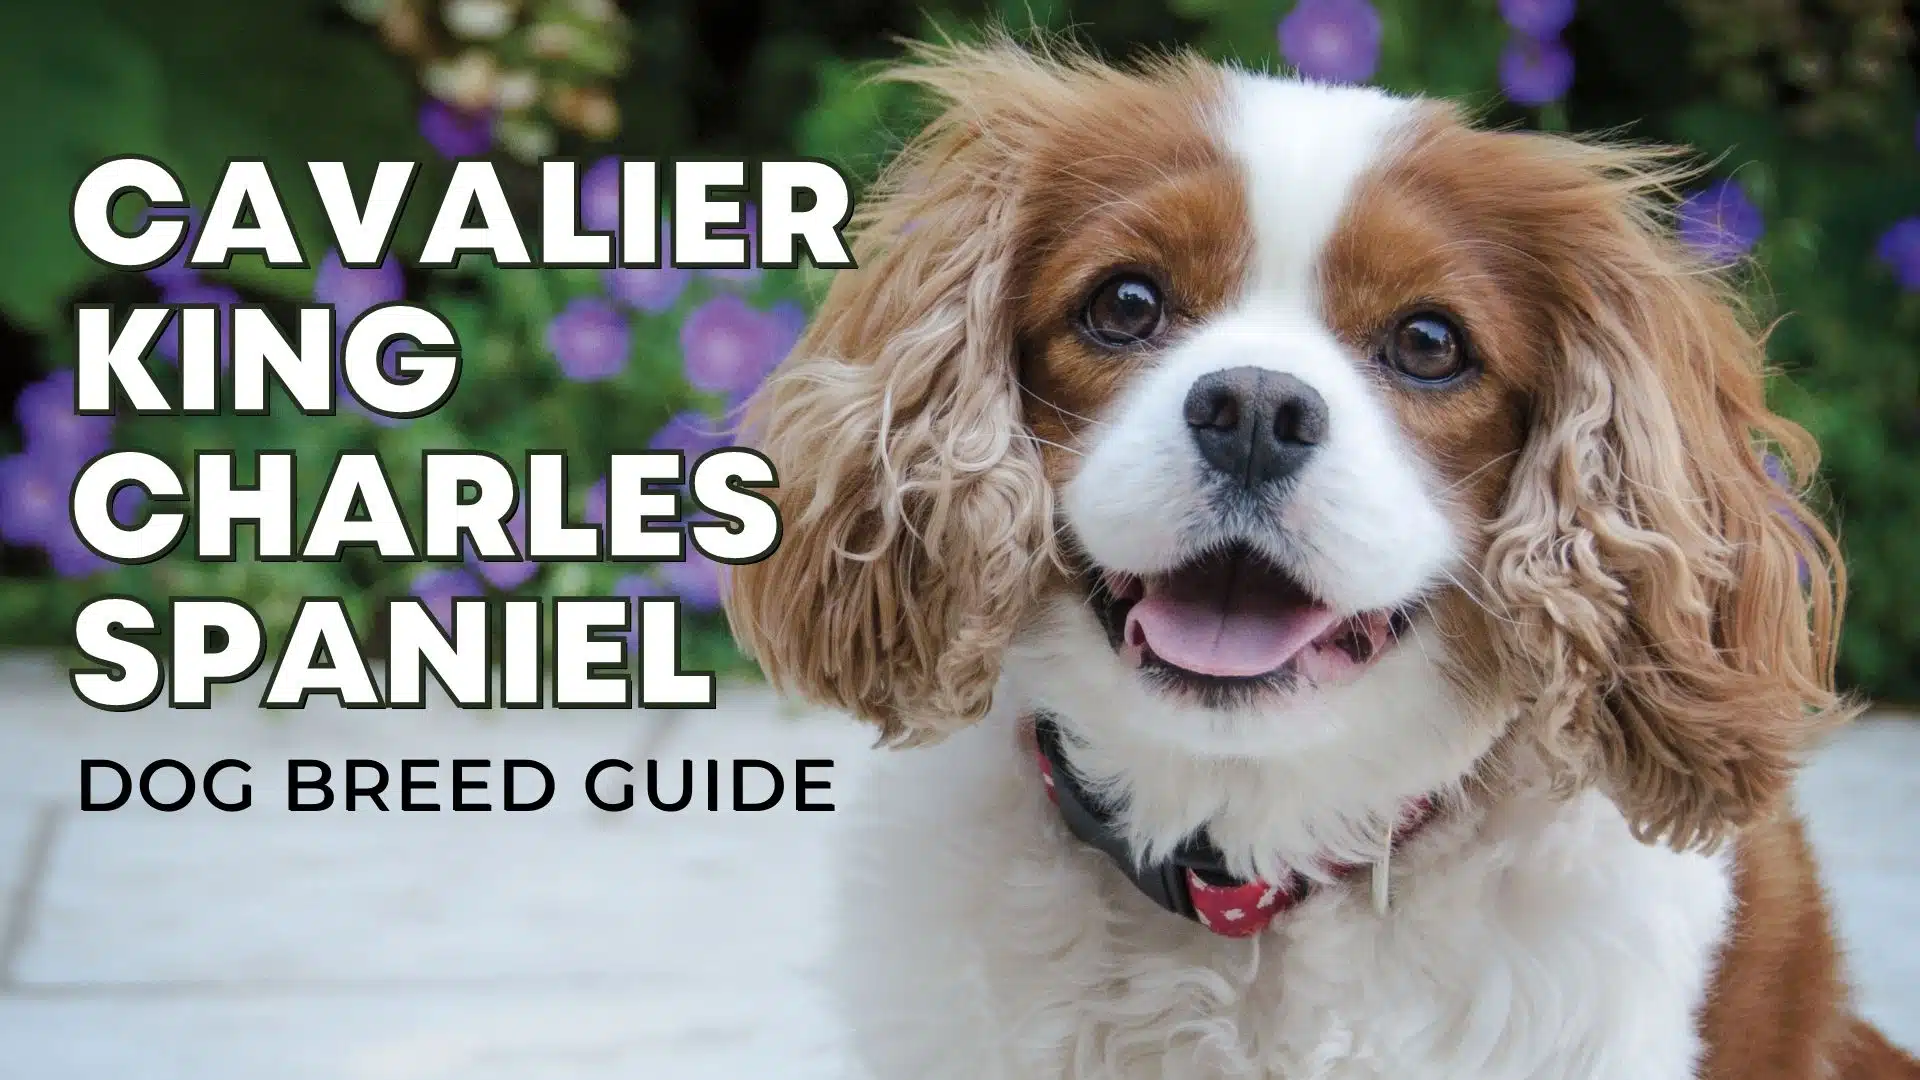 Dog Breed Guide: The Cavalier King Charles Spaniel